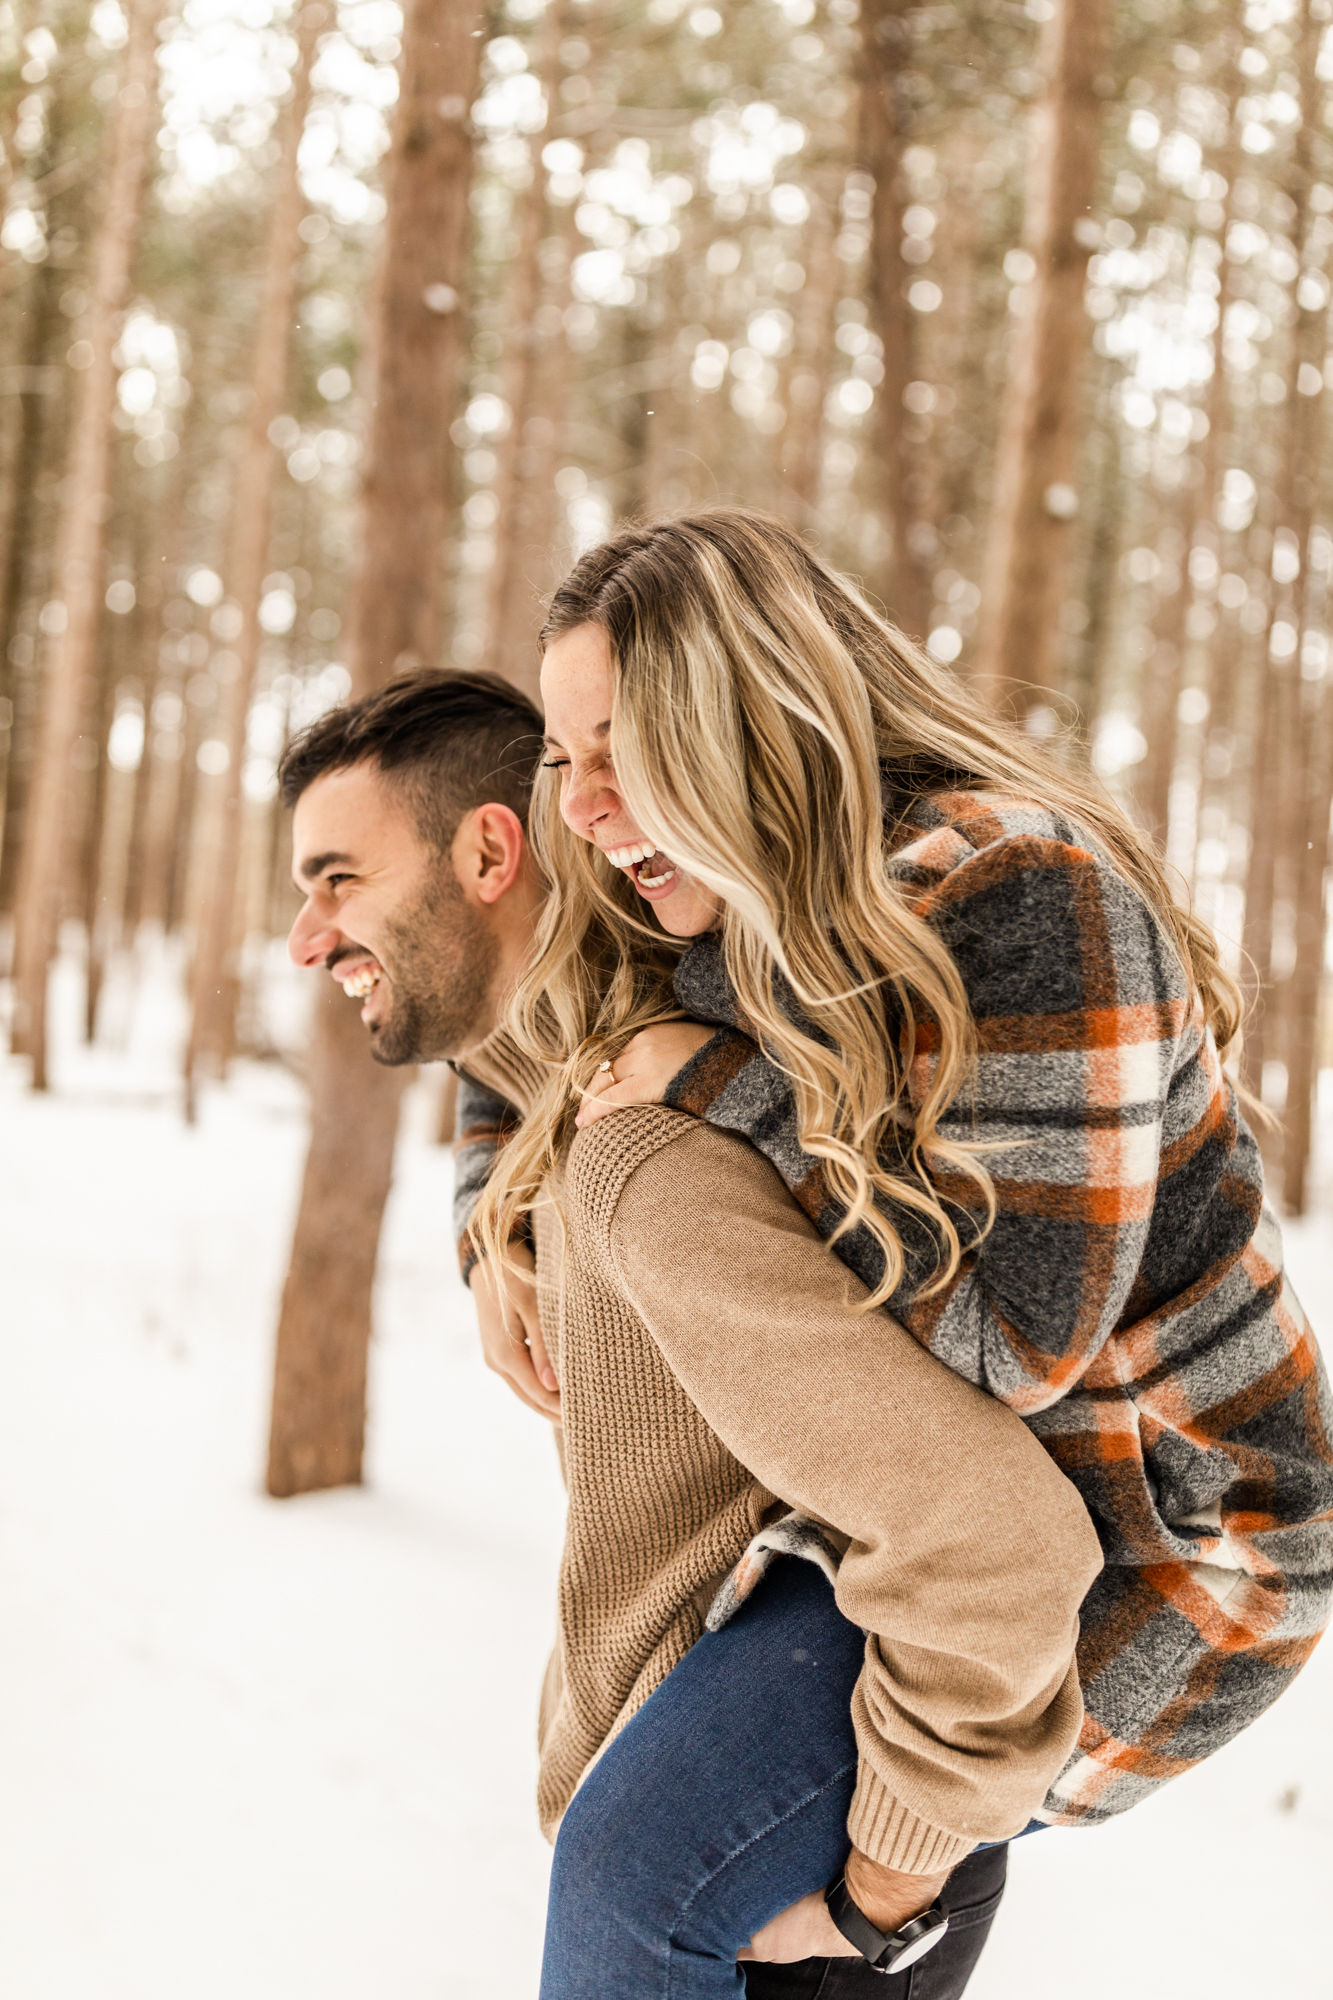 Man carrying woman on his back and laughing in snowy forest in Michigan